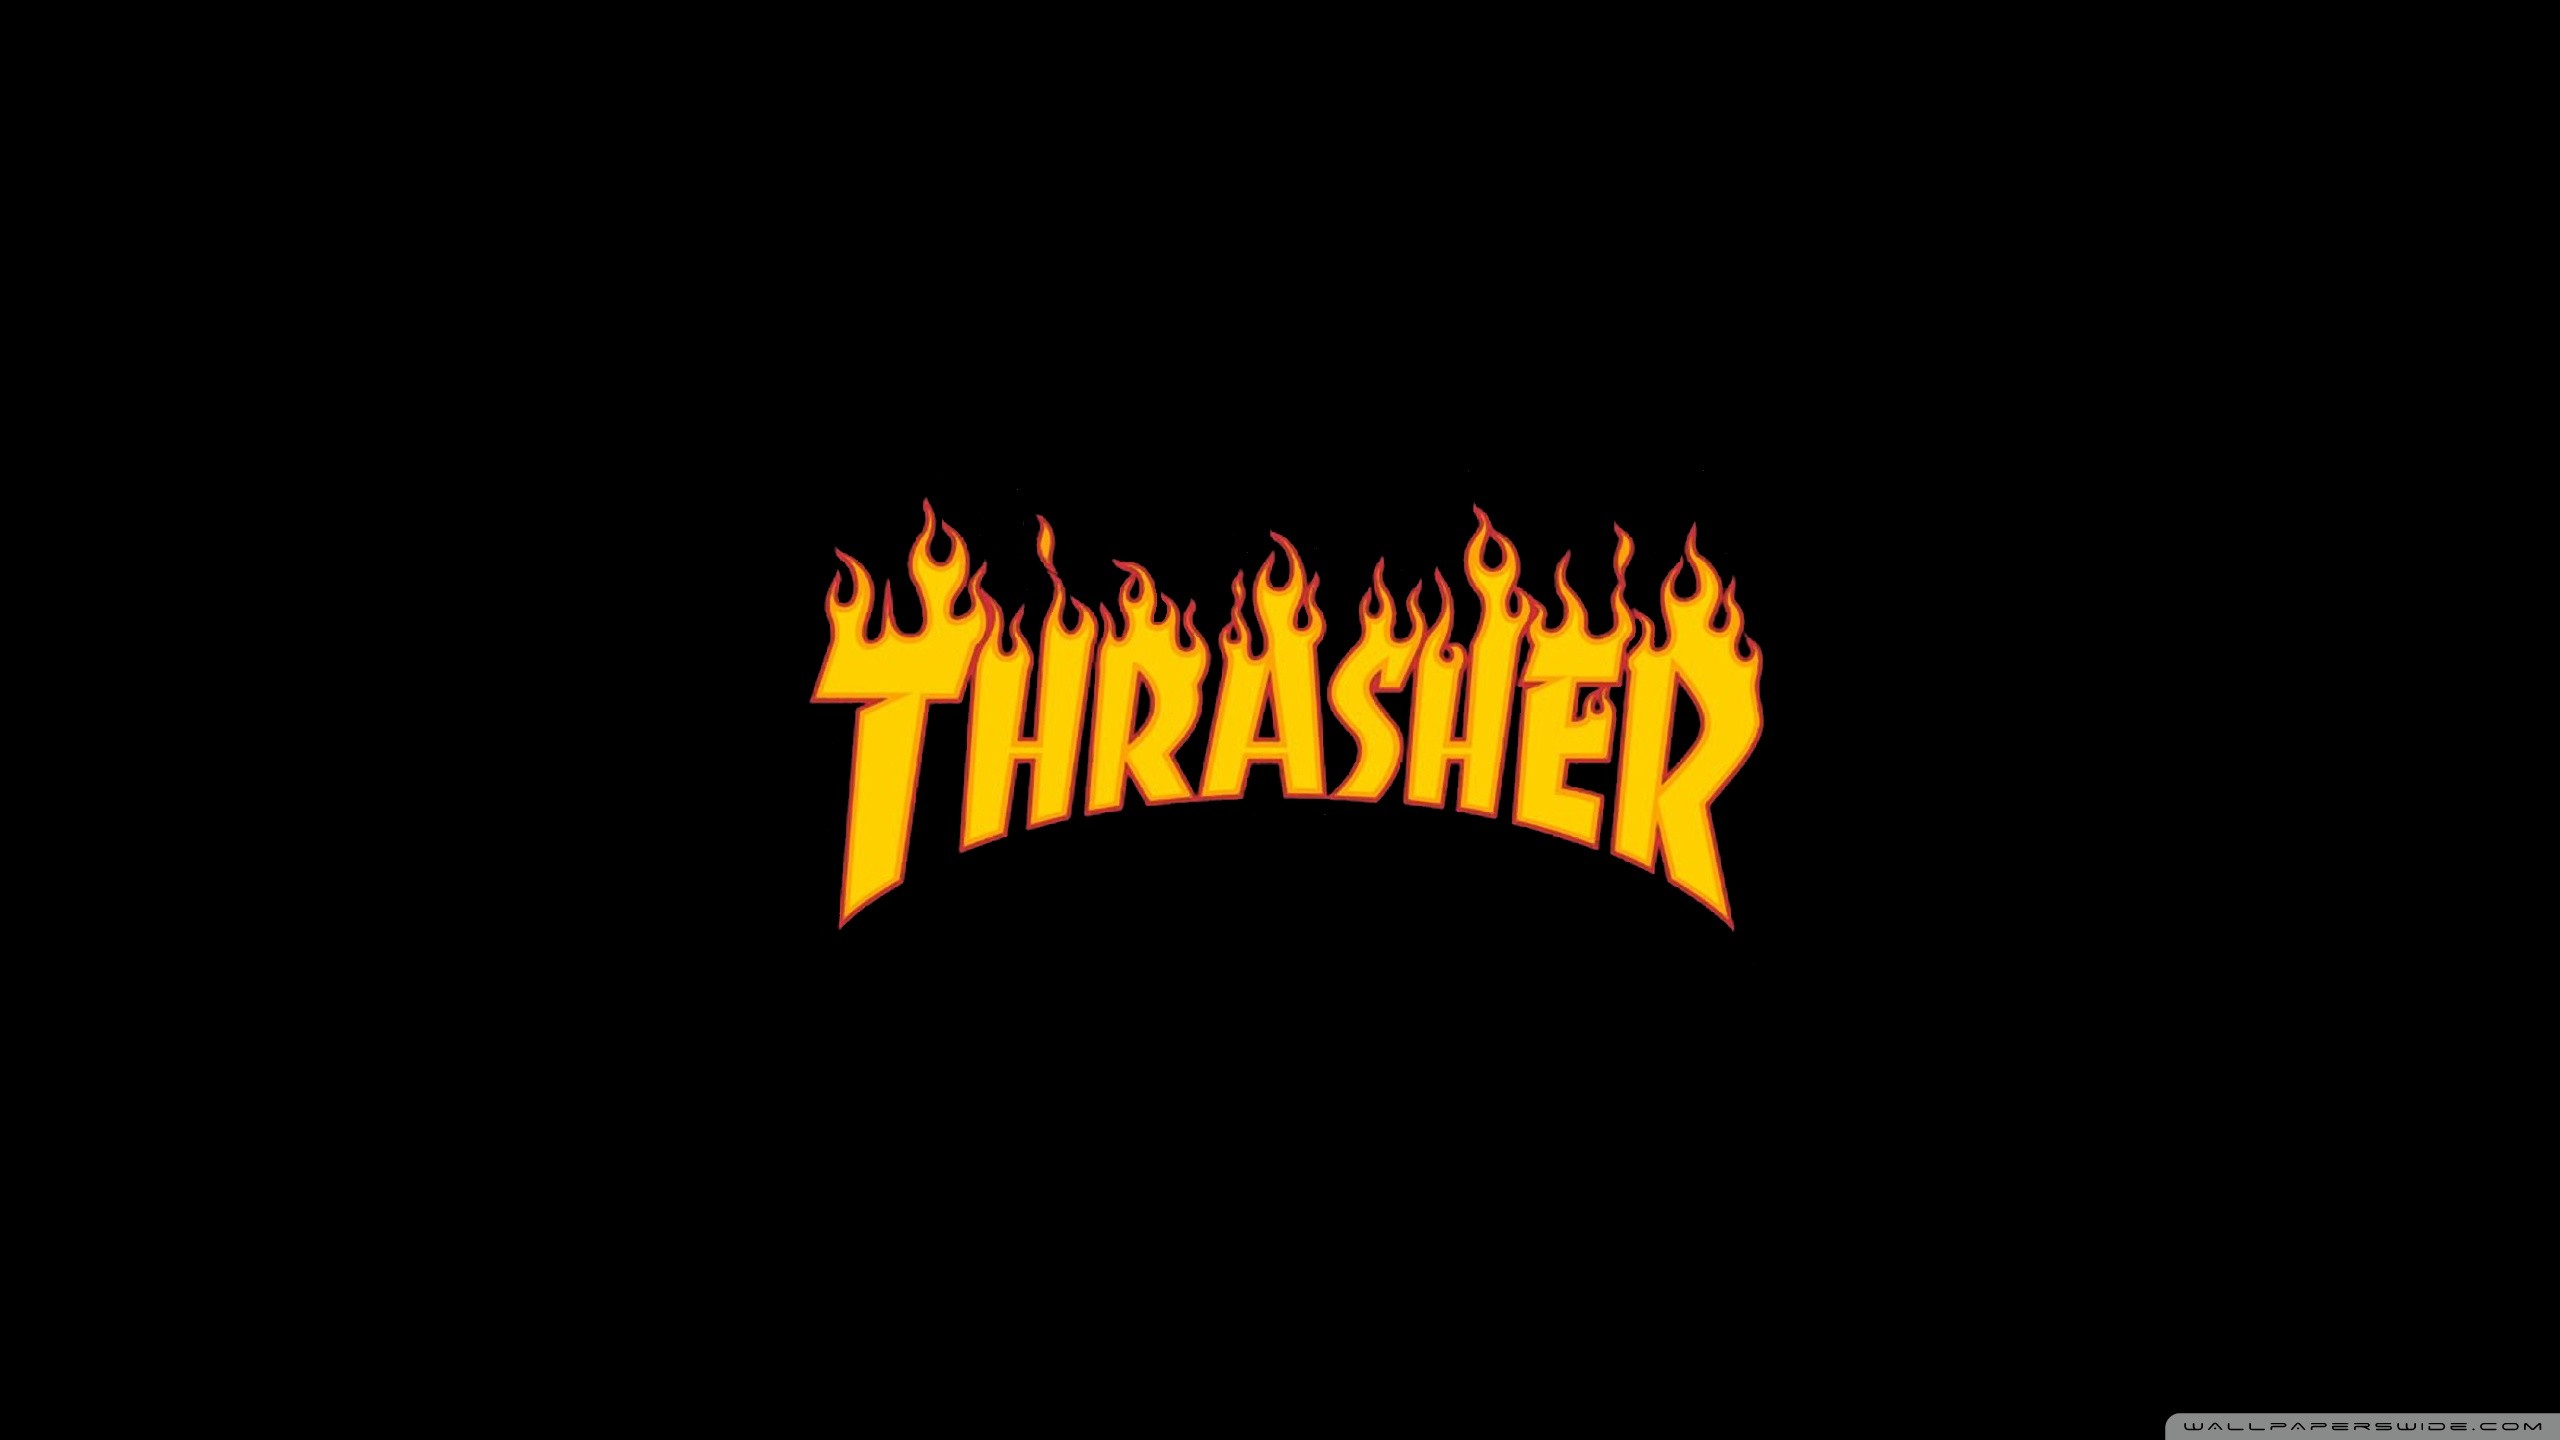 Hd Thrasher Wallpaper 55 Images